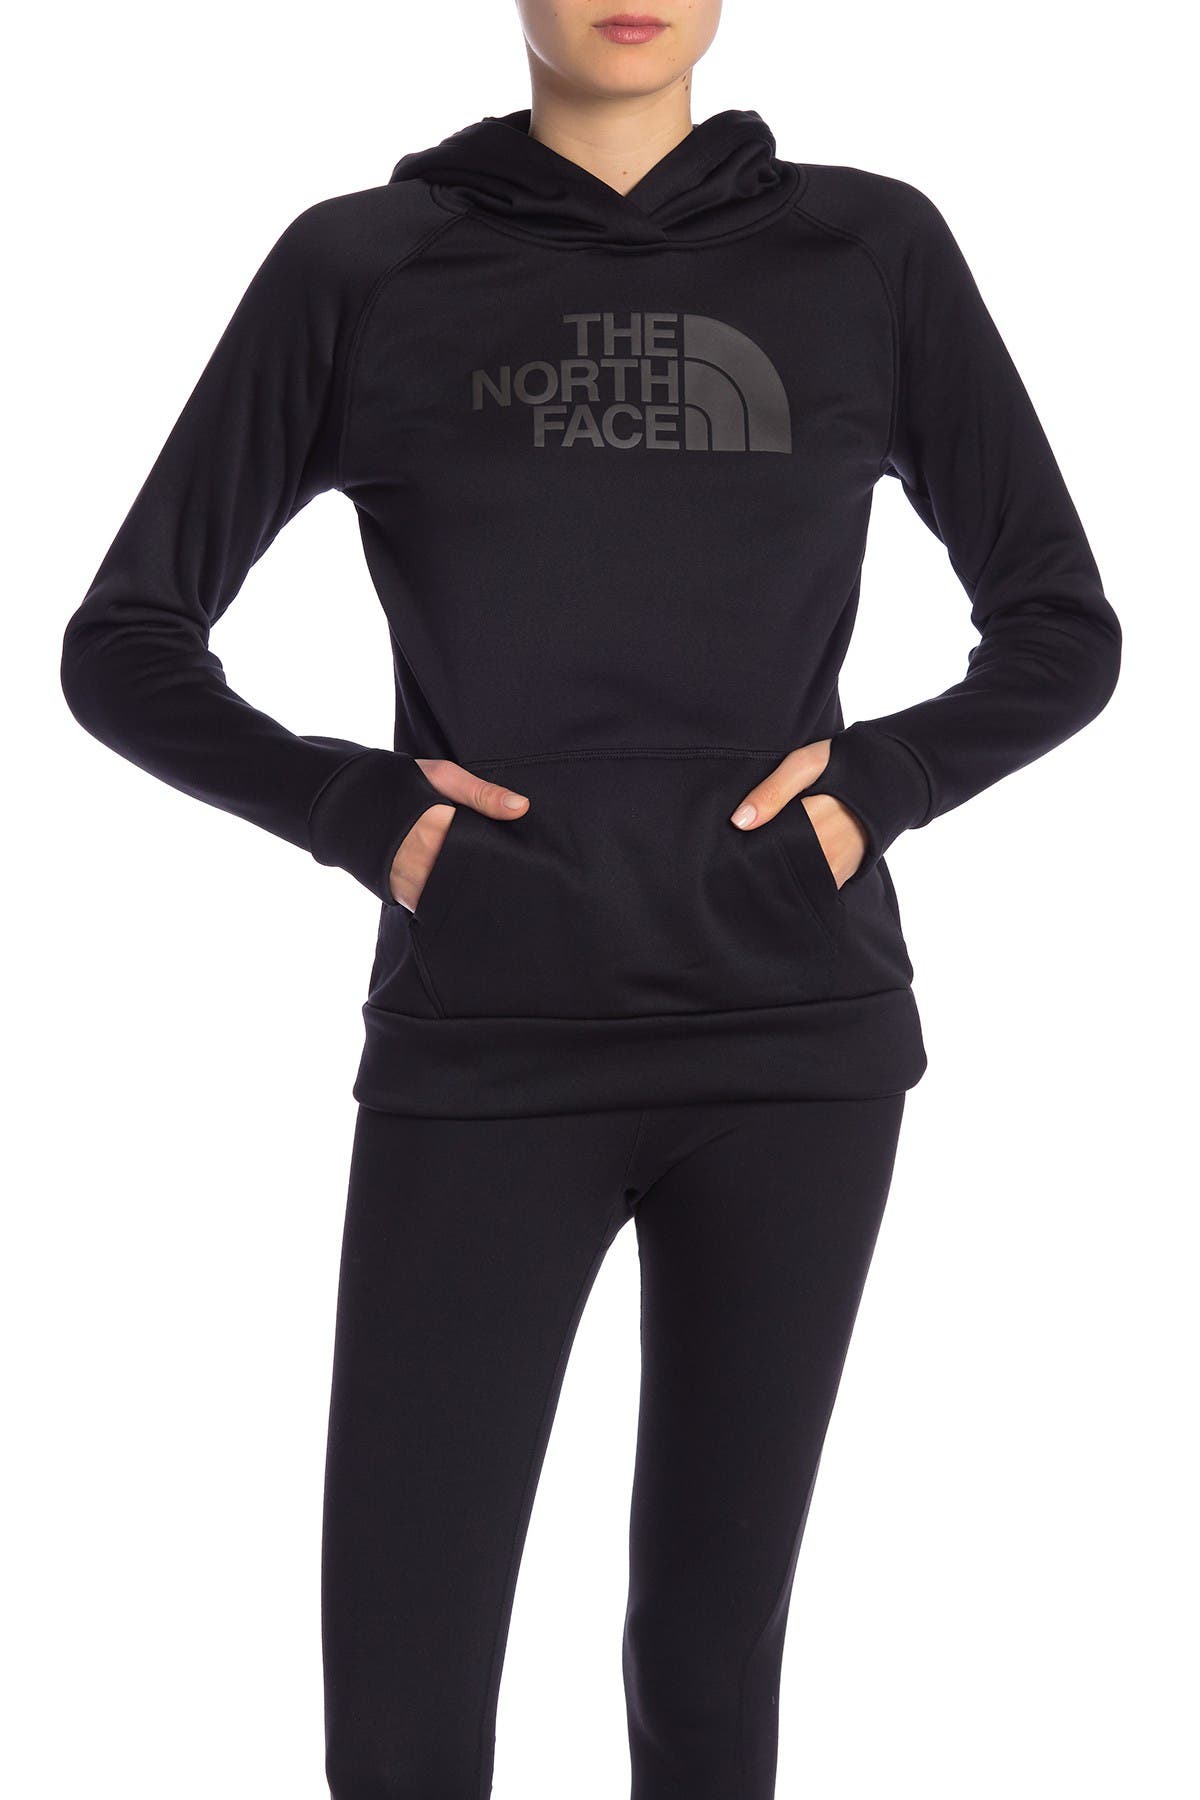 north face fave half dome hoodie